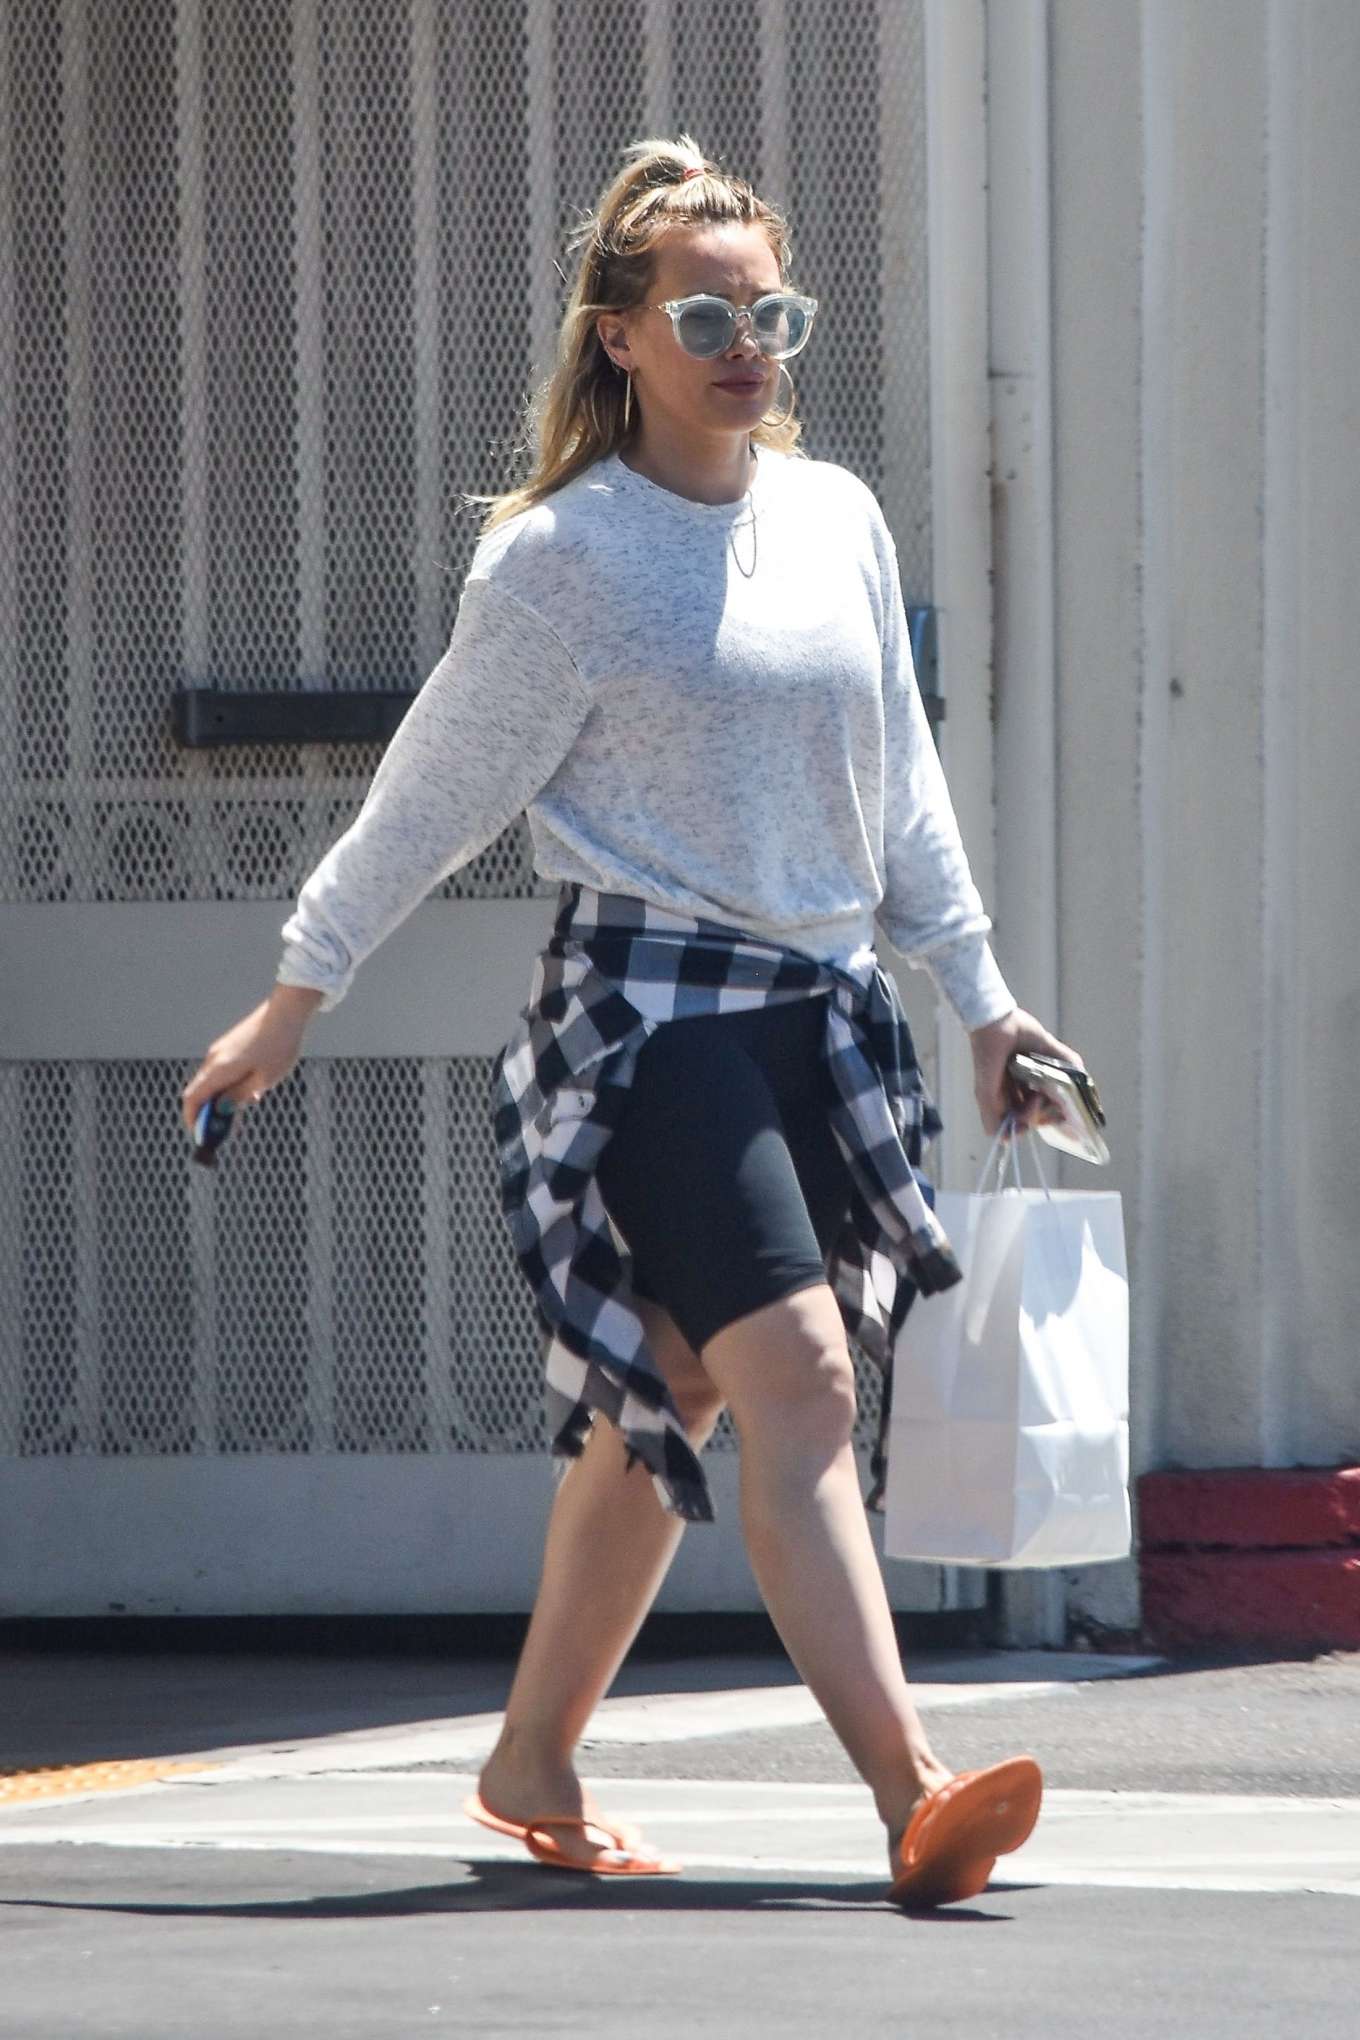 Hilary Duff - Seen on street while out in Studio City